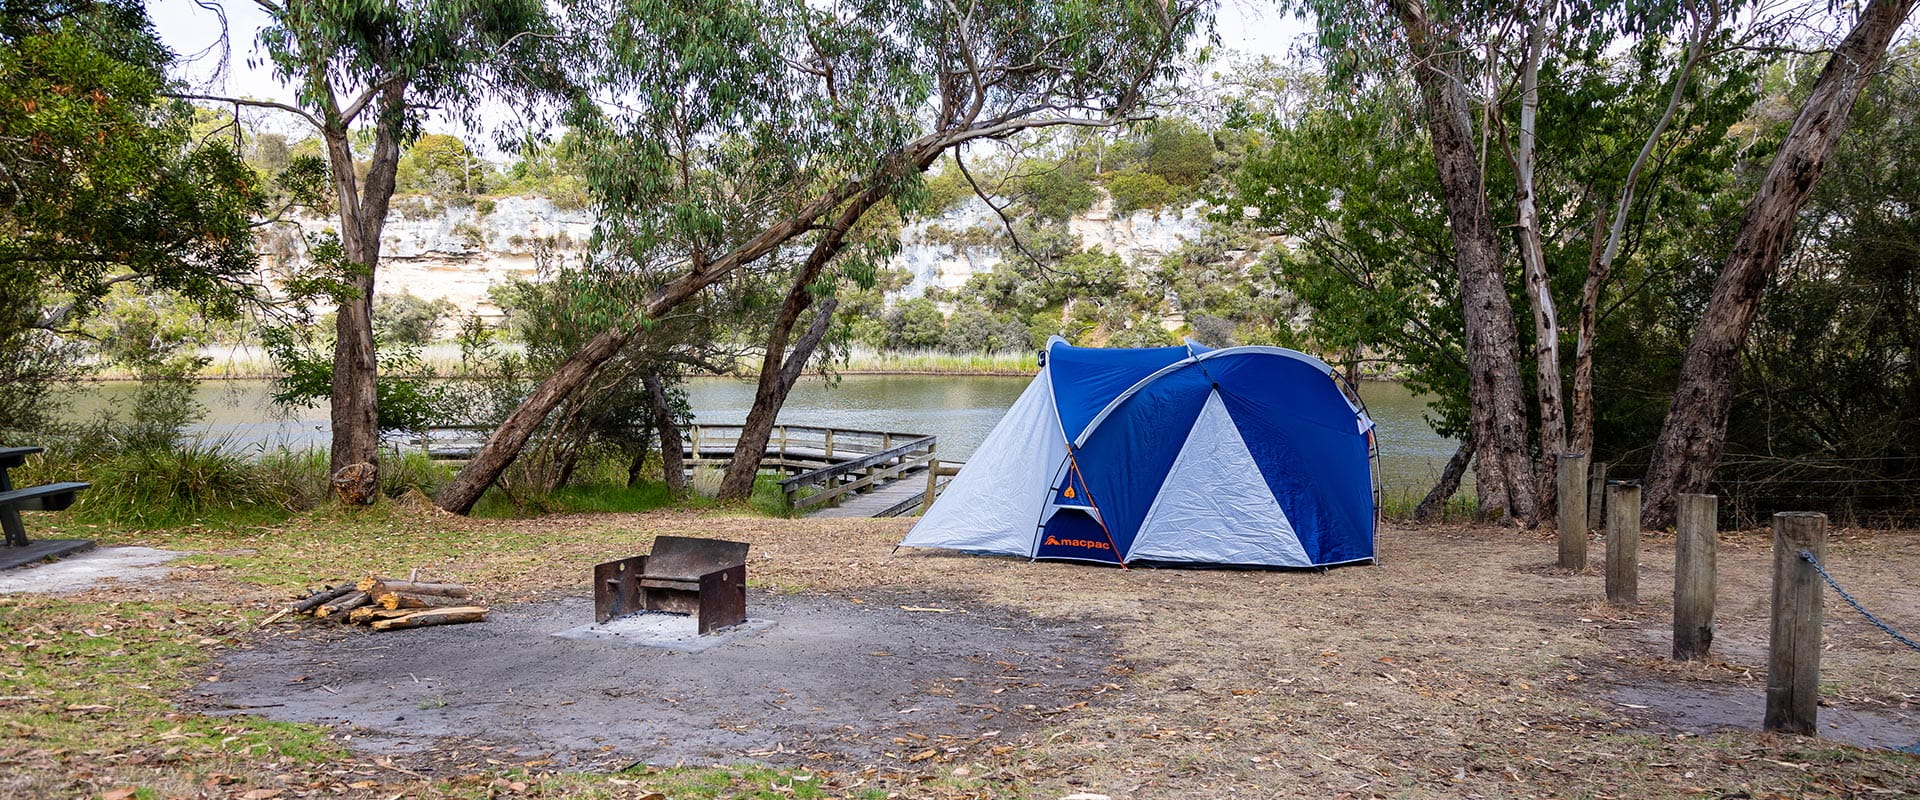 A fireplace in front of a large tent next to the river at Hutchessons Campground at Lower Glenelg National Park.